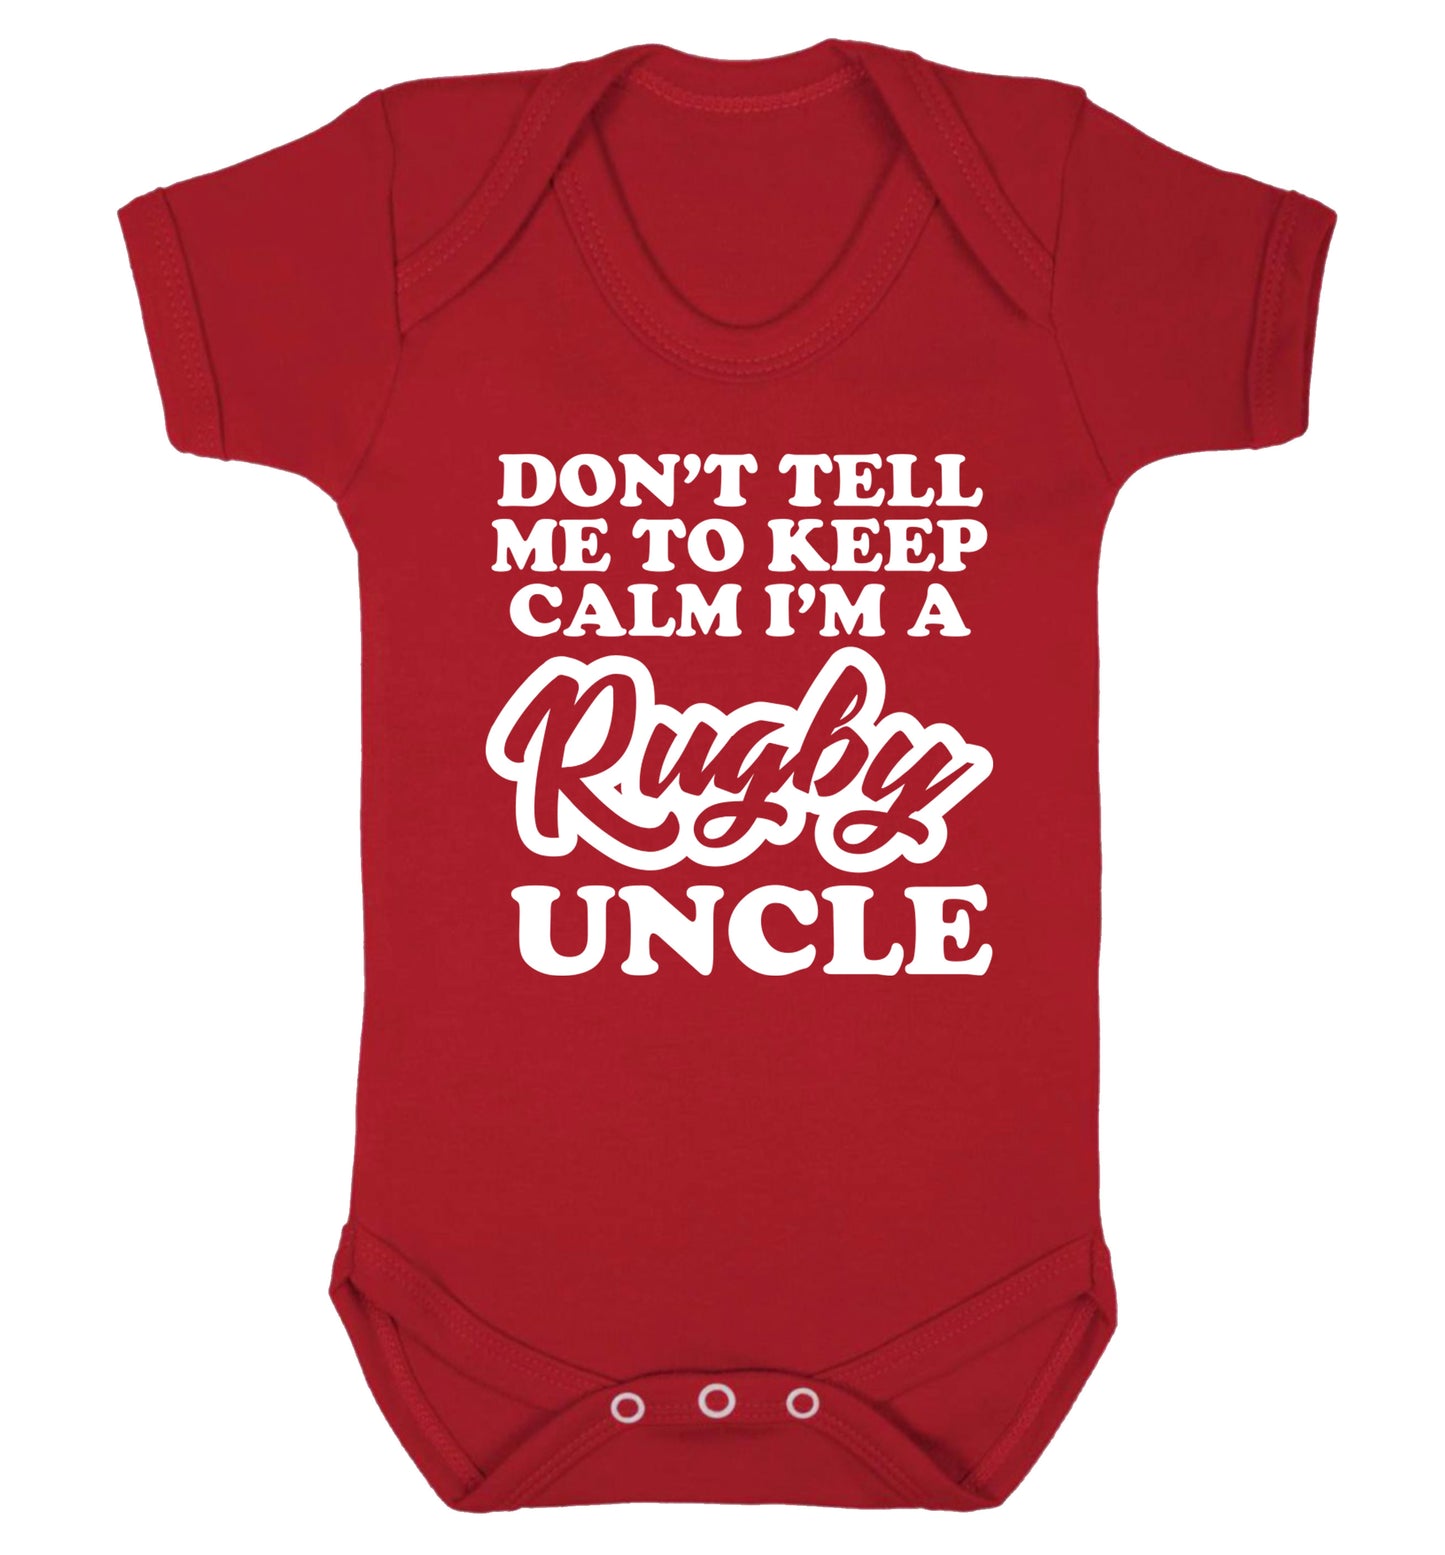 Don't tell me to keep calm I'm a rugby uncle Baby Vest red 18-24 months